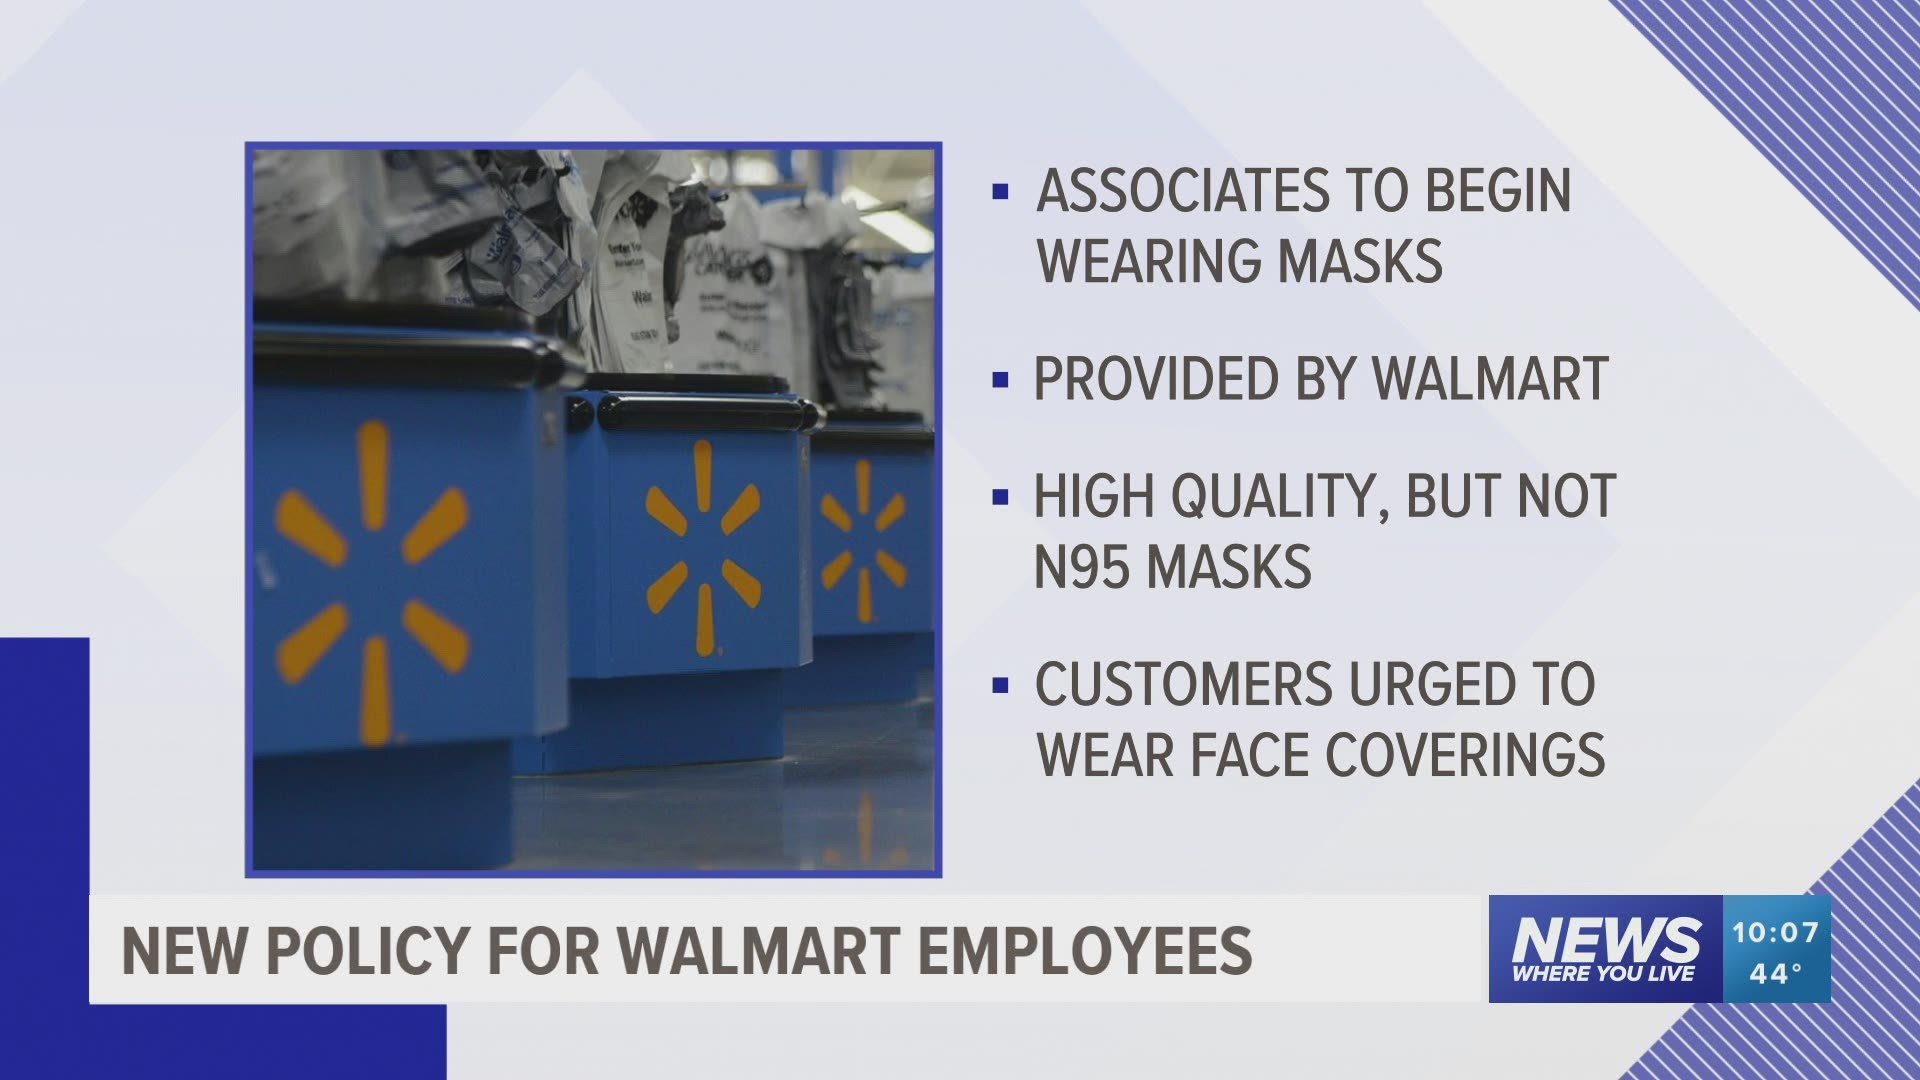 Walmart To Require Associates Wear Masks Or Other Face Coverings